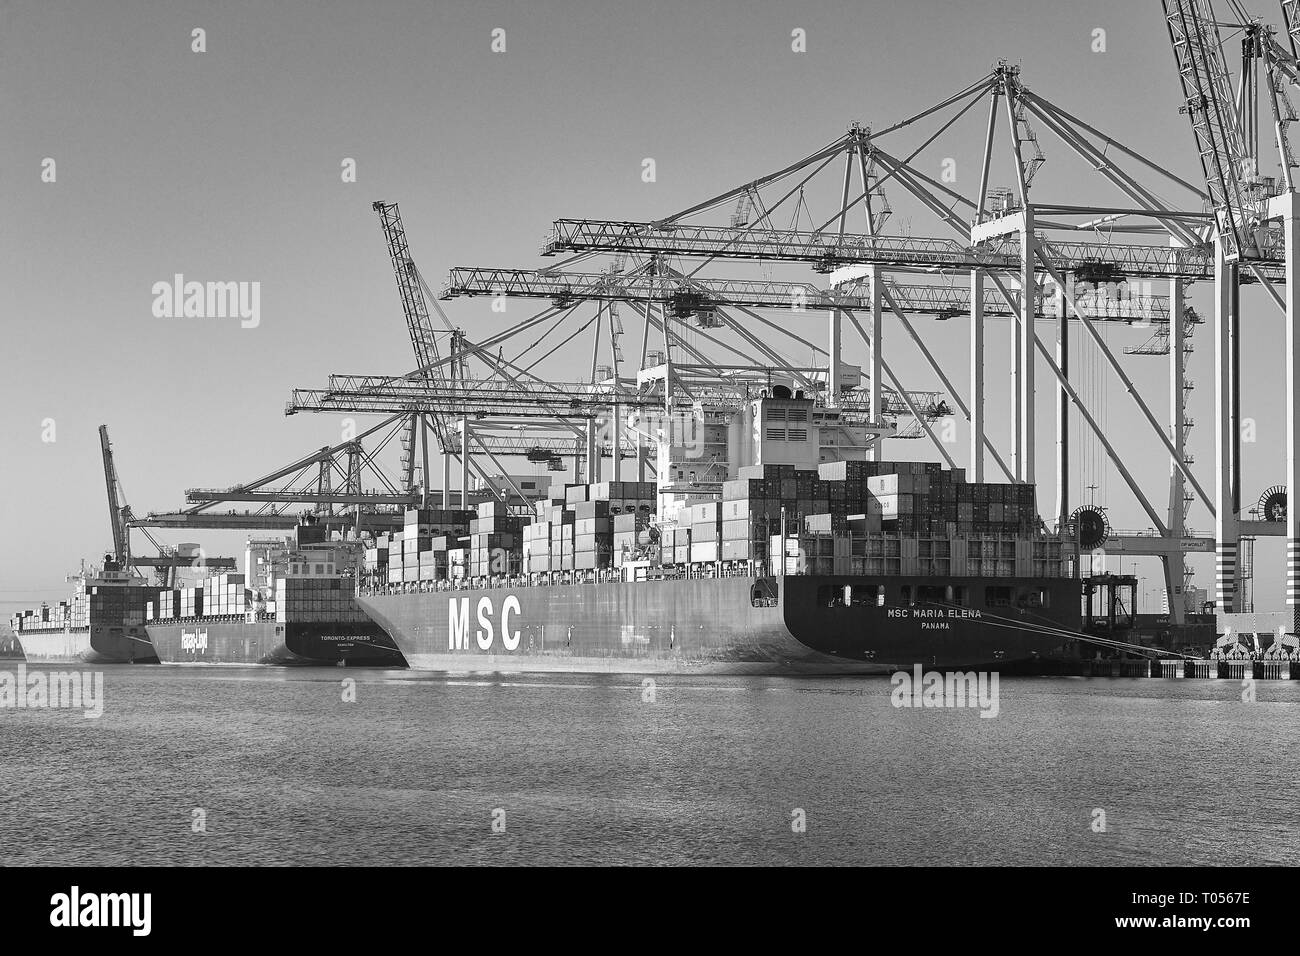 Black And White Photo Of Container Ships Busy Loading And Unloading Shipping Containers At The Southampton Container Terminal, Hampshire, UK. Stock Photo